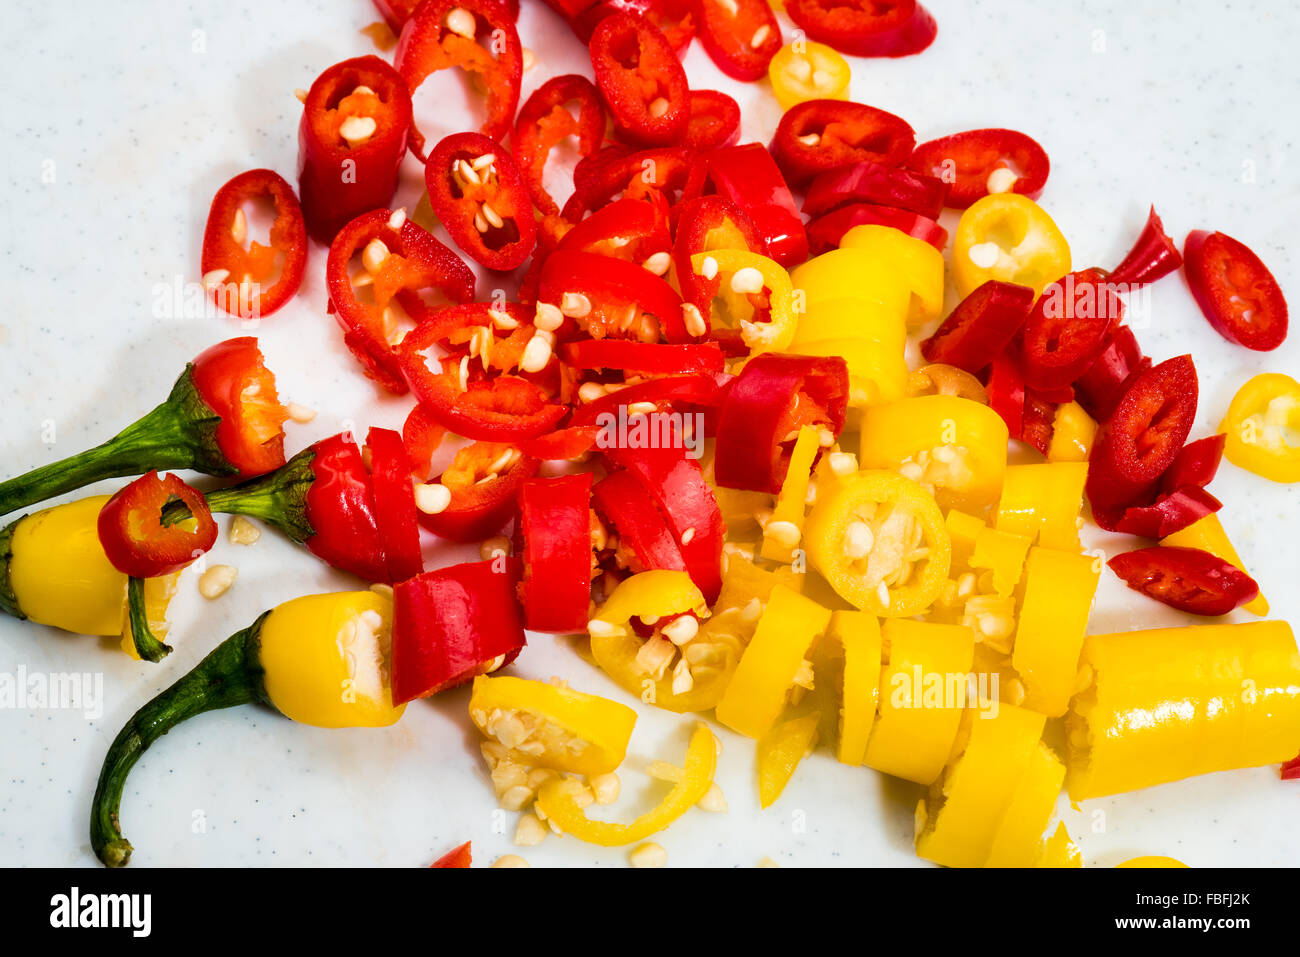 the chillies cut, rings, spicy hot, yellow, red, green, paprika, pepper, pepperoni peppers chilli colored colorful supermarket v Stock Photo